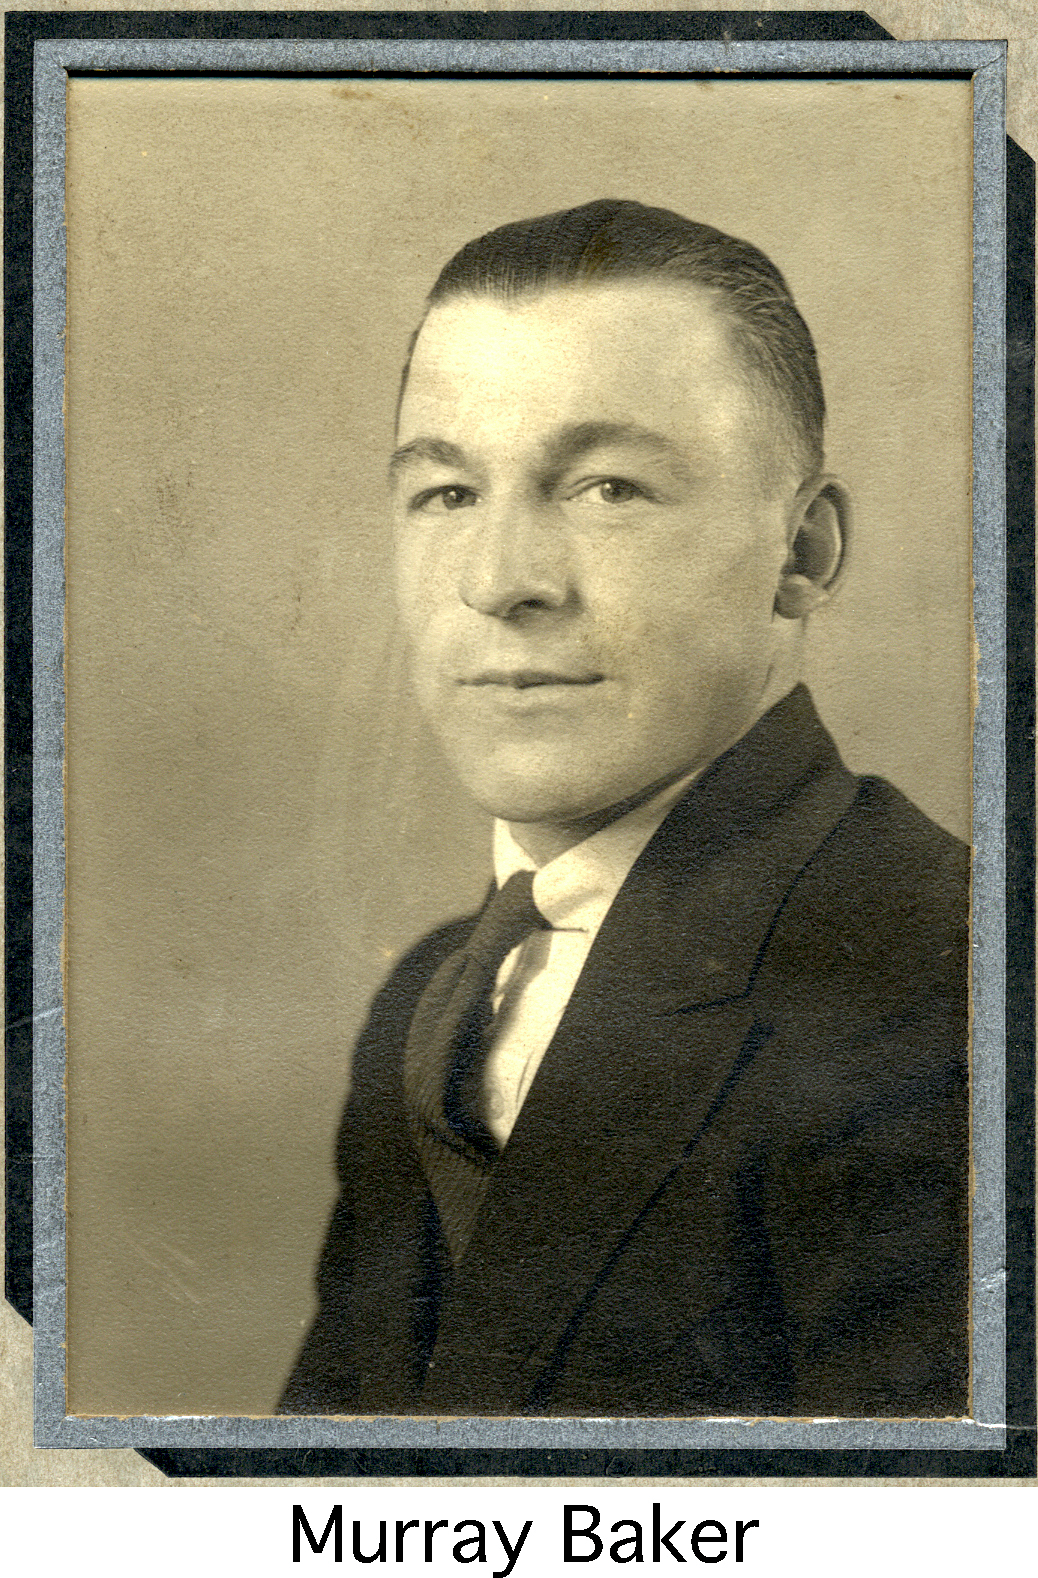 Murray Baker wearing a dark coat and tie in a formal photograph